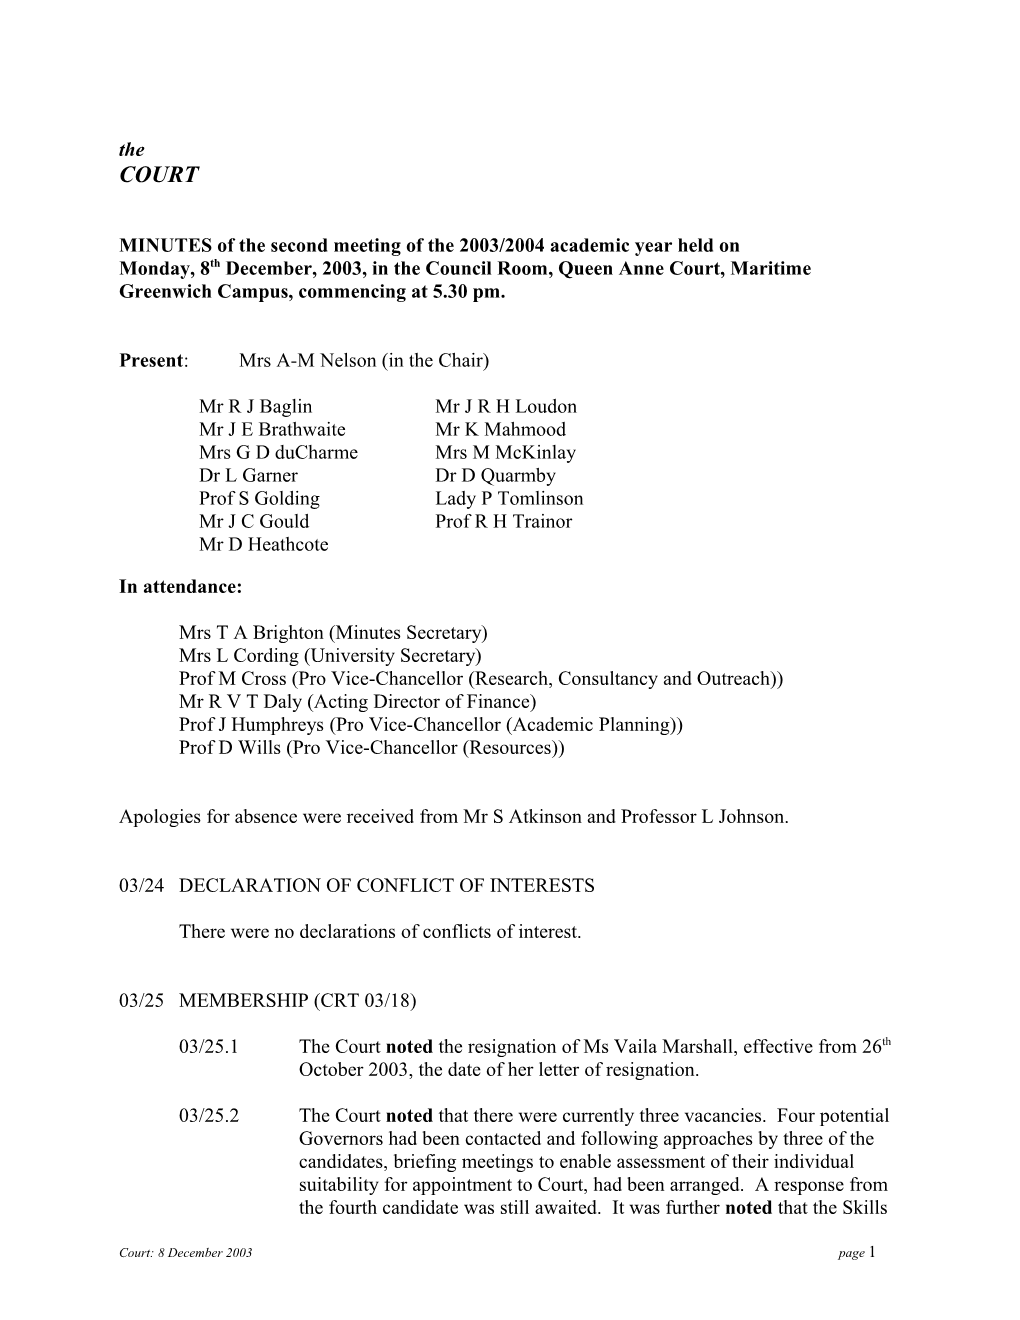 MINUTES of the Second Meeting of the 2003/2004 Academic Year Held On